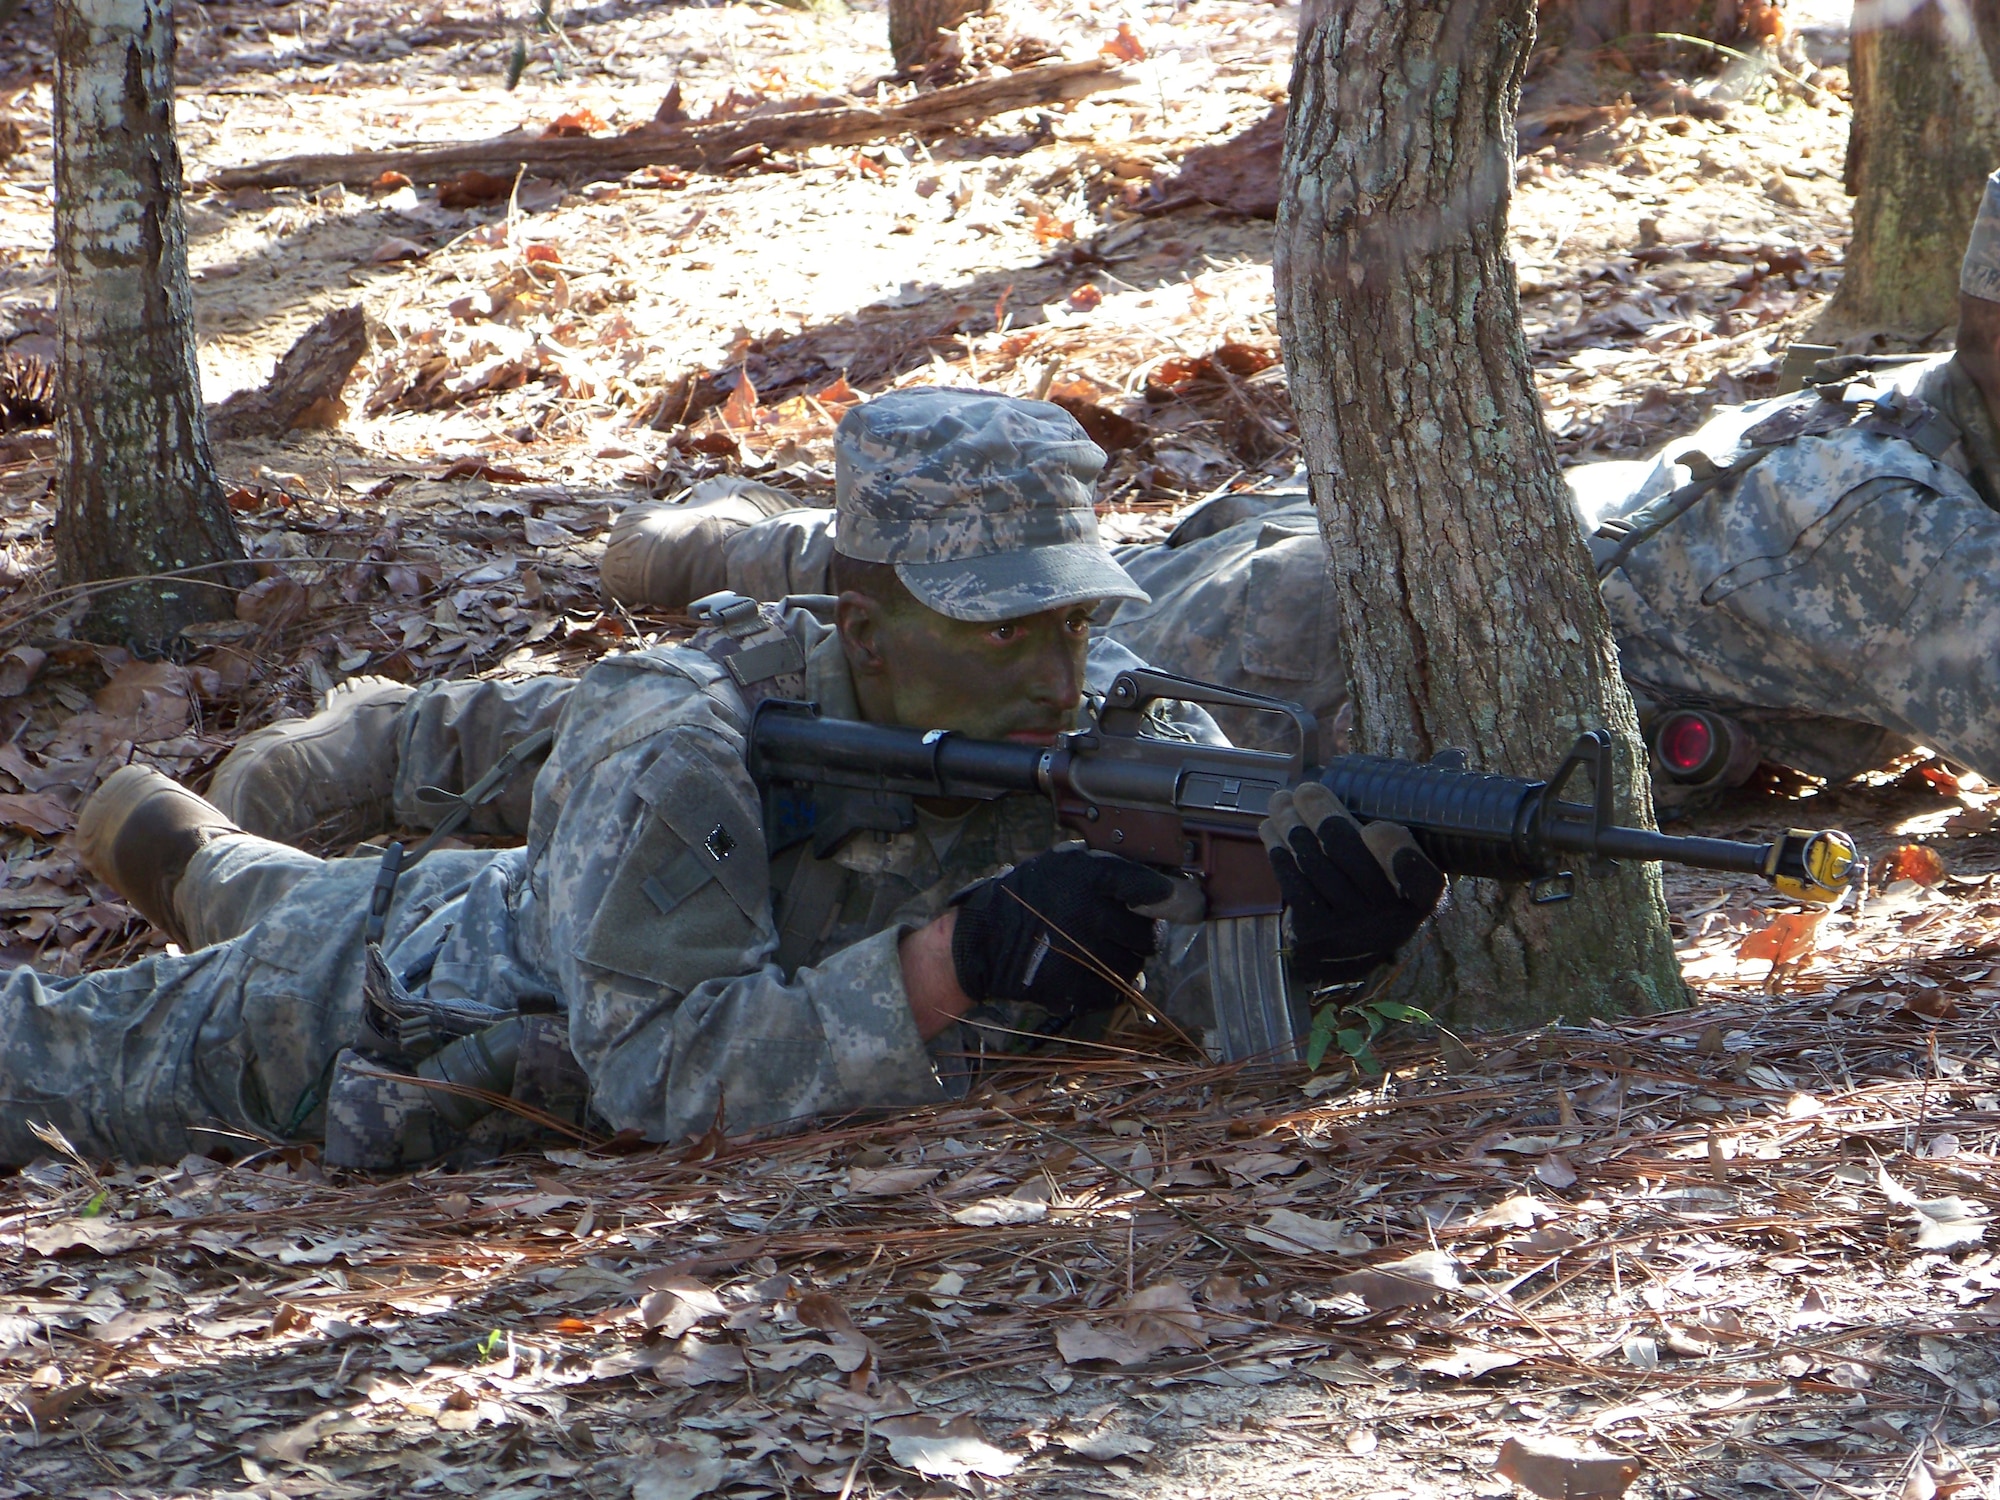 HURLBURT FIELD, Fla. -- Airman 1st Class Thiago Barosa, a 342nd Training Squadron tactical air control party student lies in the prone position with his weapon while awaint further instructions during a portion of field training here, Feb. 12. TACPs act as a liaison between U.S. Army ground maneuver units and Air Force pilots. (U.S. Air Force photo by Staff Sgt. Mareshah Haynes)